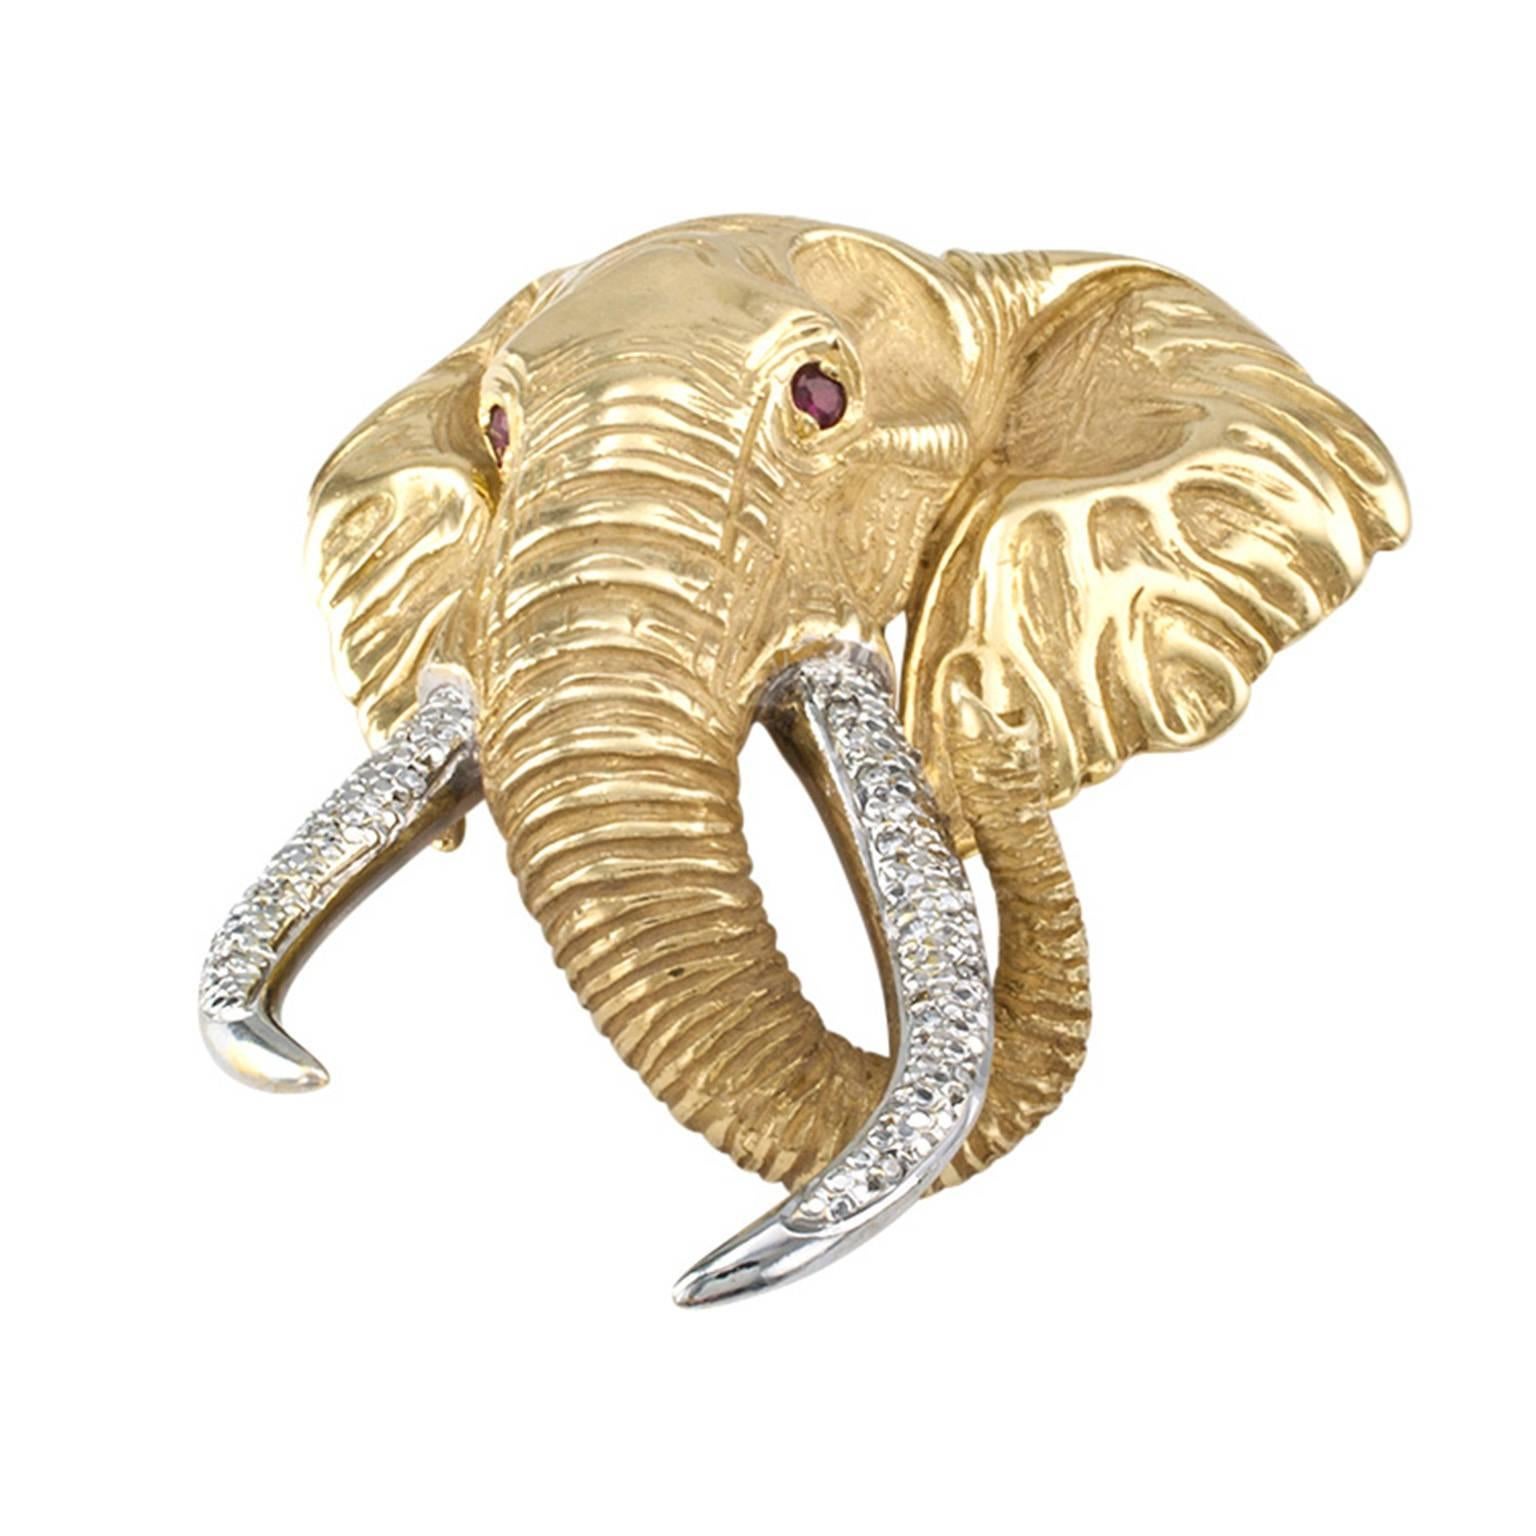 Estate Elephant Large Brooch Pendant

Look no further if you love elephants, and who doesn't?  Wear it as a pin or as a pendant and be prepared to rake in the compliments.  A jewel as magnificent as the jungle beast it represents, crated in 14